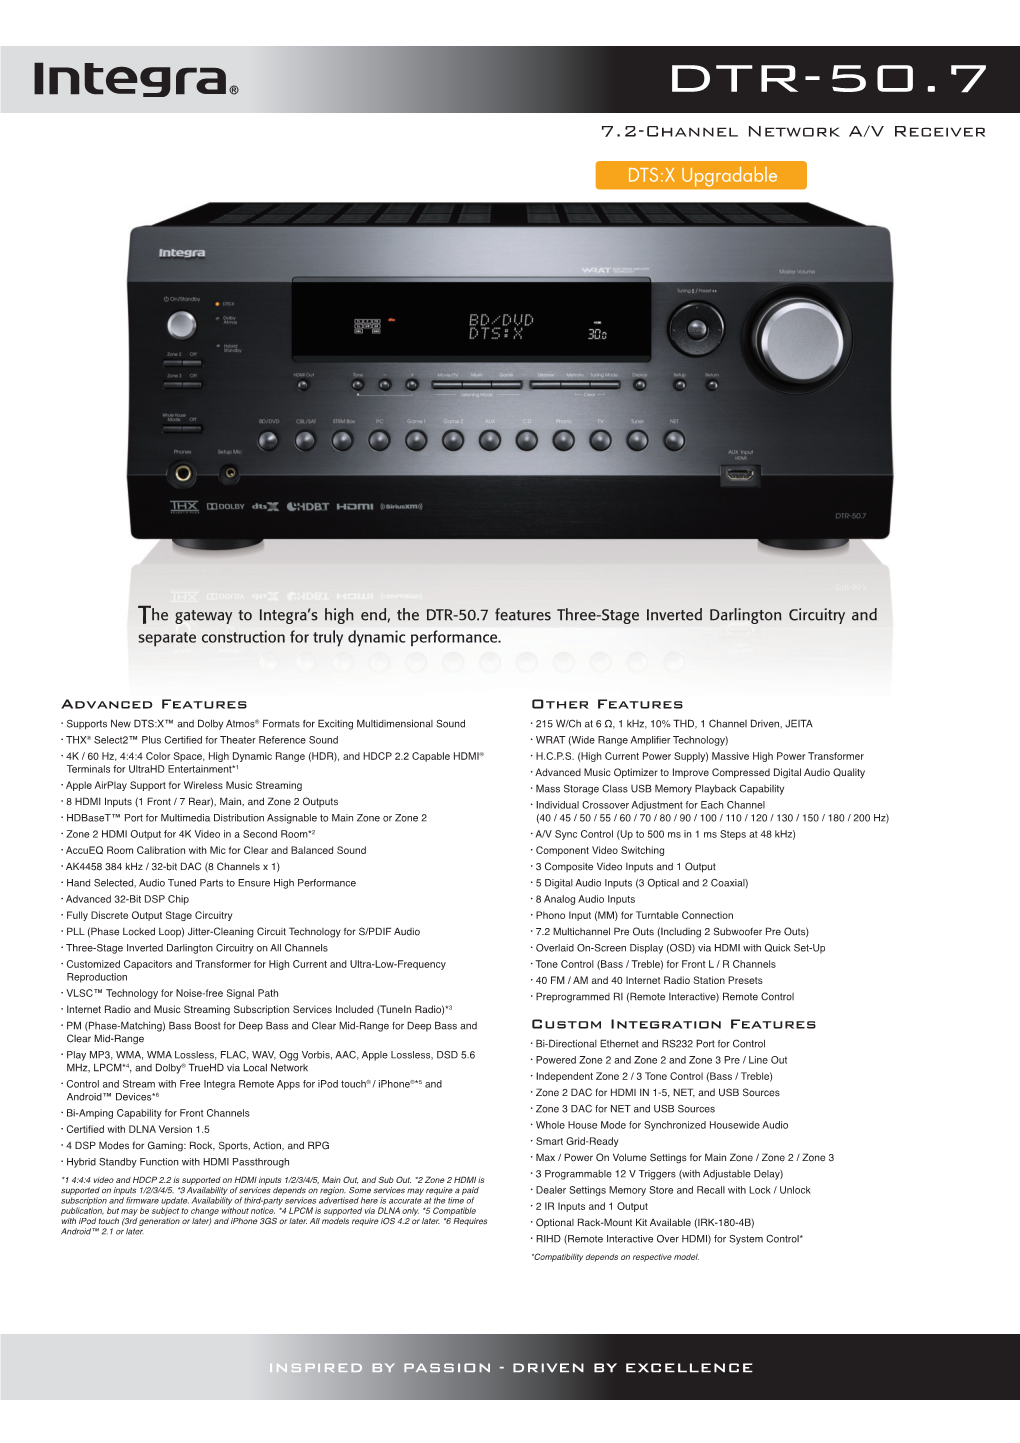 DTR-50.7 7.2-Channel Network A/V Receiver